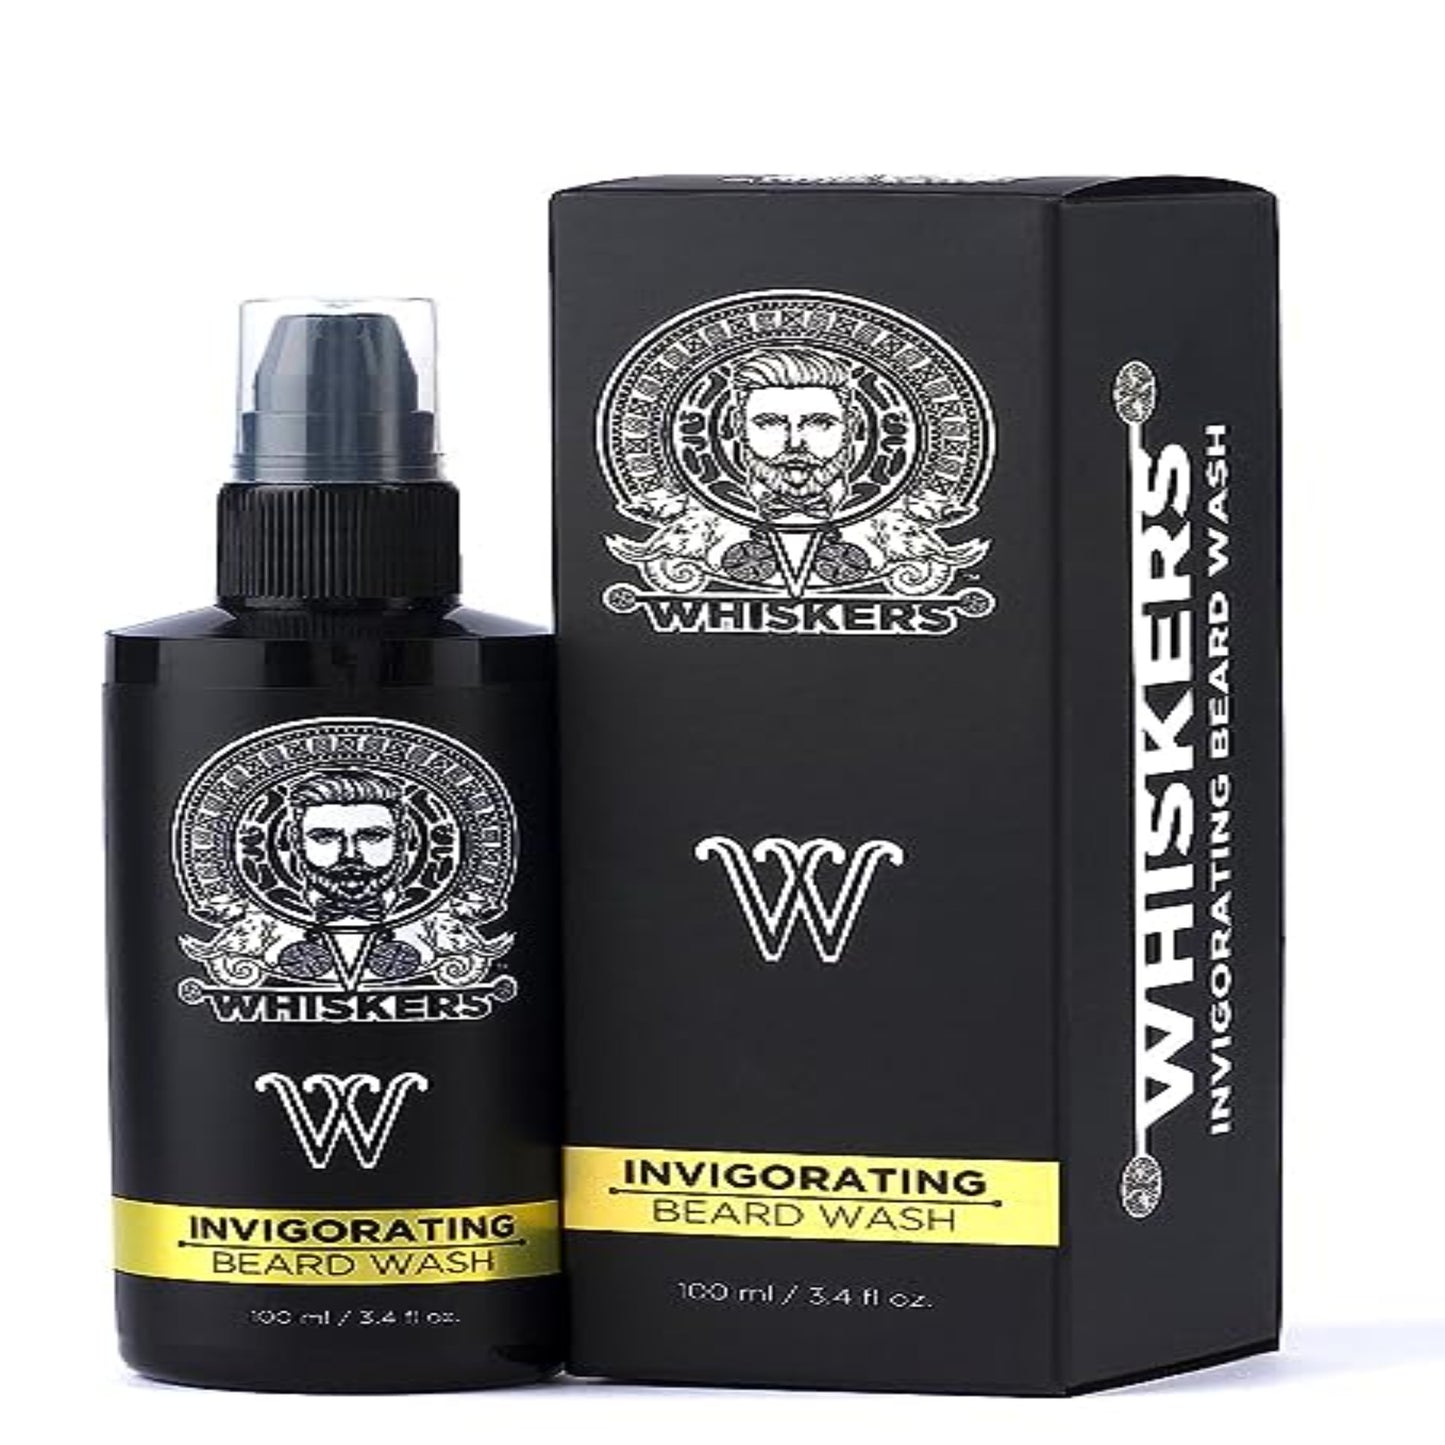 Whiskers Invigorating Beard Wash Infused with Vitamin E Sweet Almond & Wheat Germ Oil|Aromatic|Nourishes,Softens Beard & Adds Shine|100ml